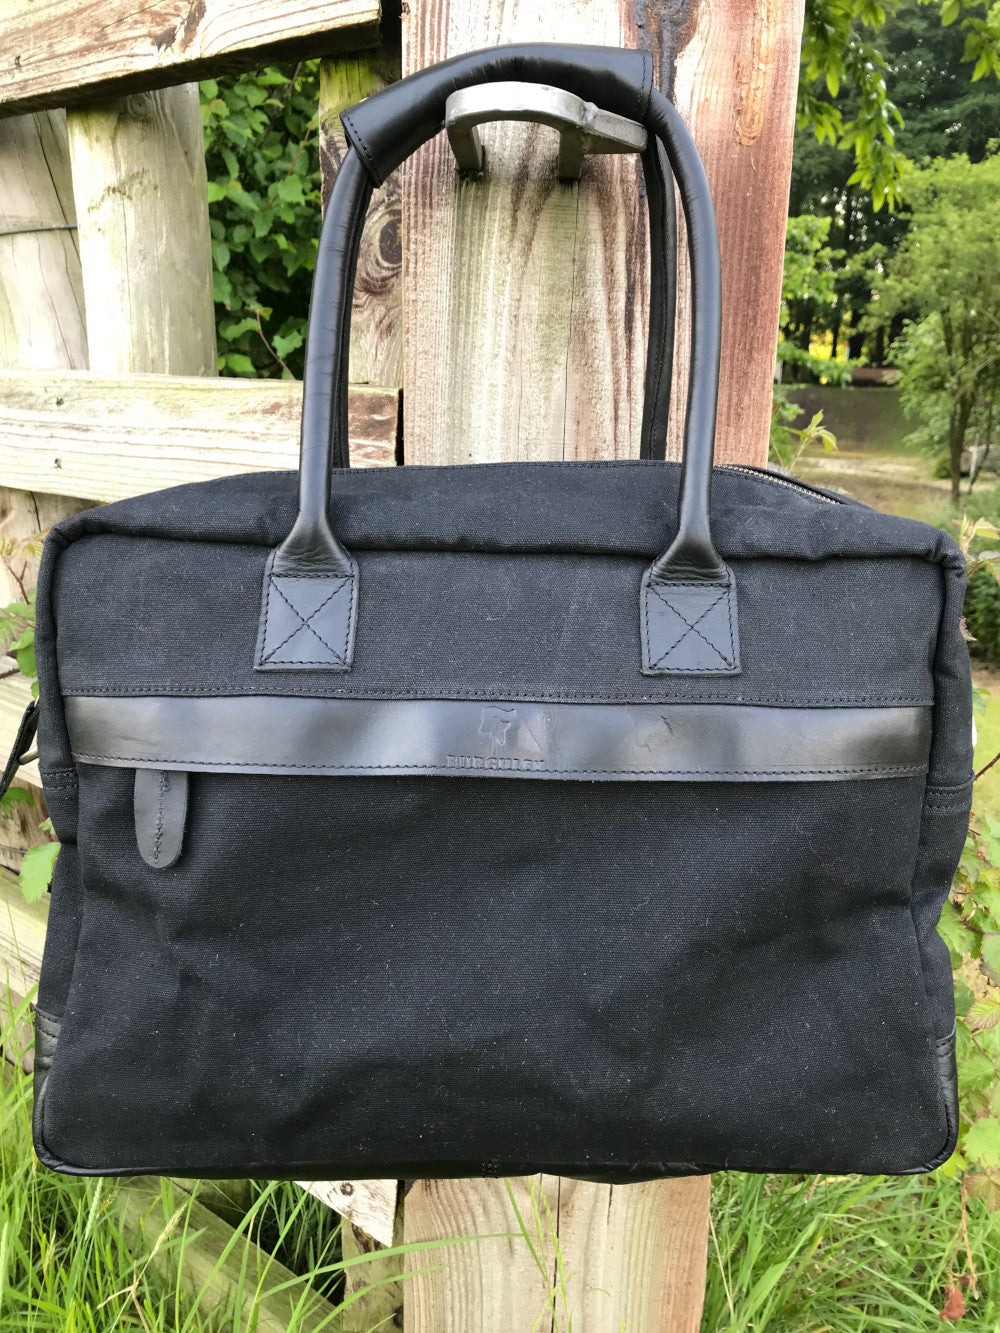 The Breton Briefcase. A casual work bag by Burghley Bags. Handmade from strong cotton canvas and supple leather.  Shown in elegant black.